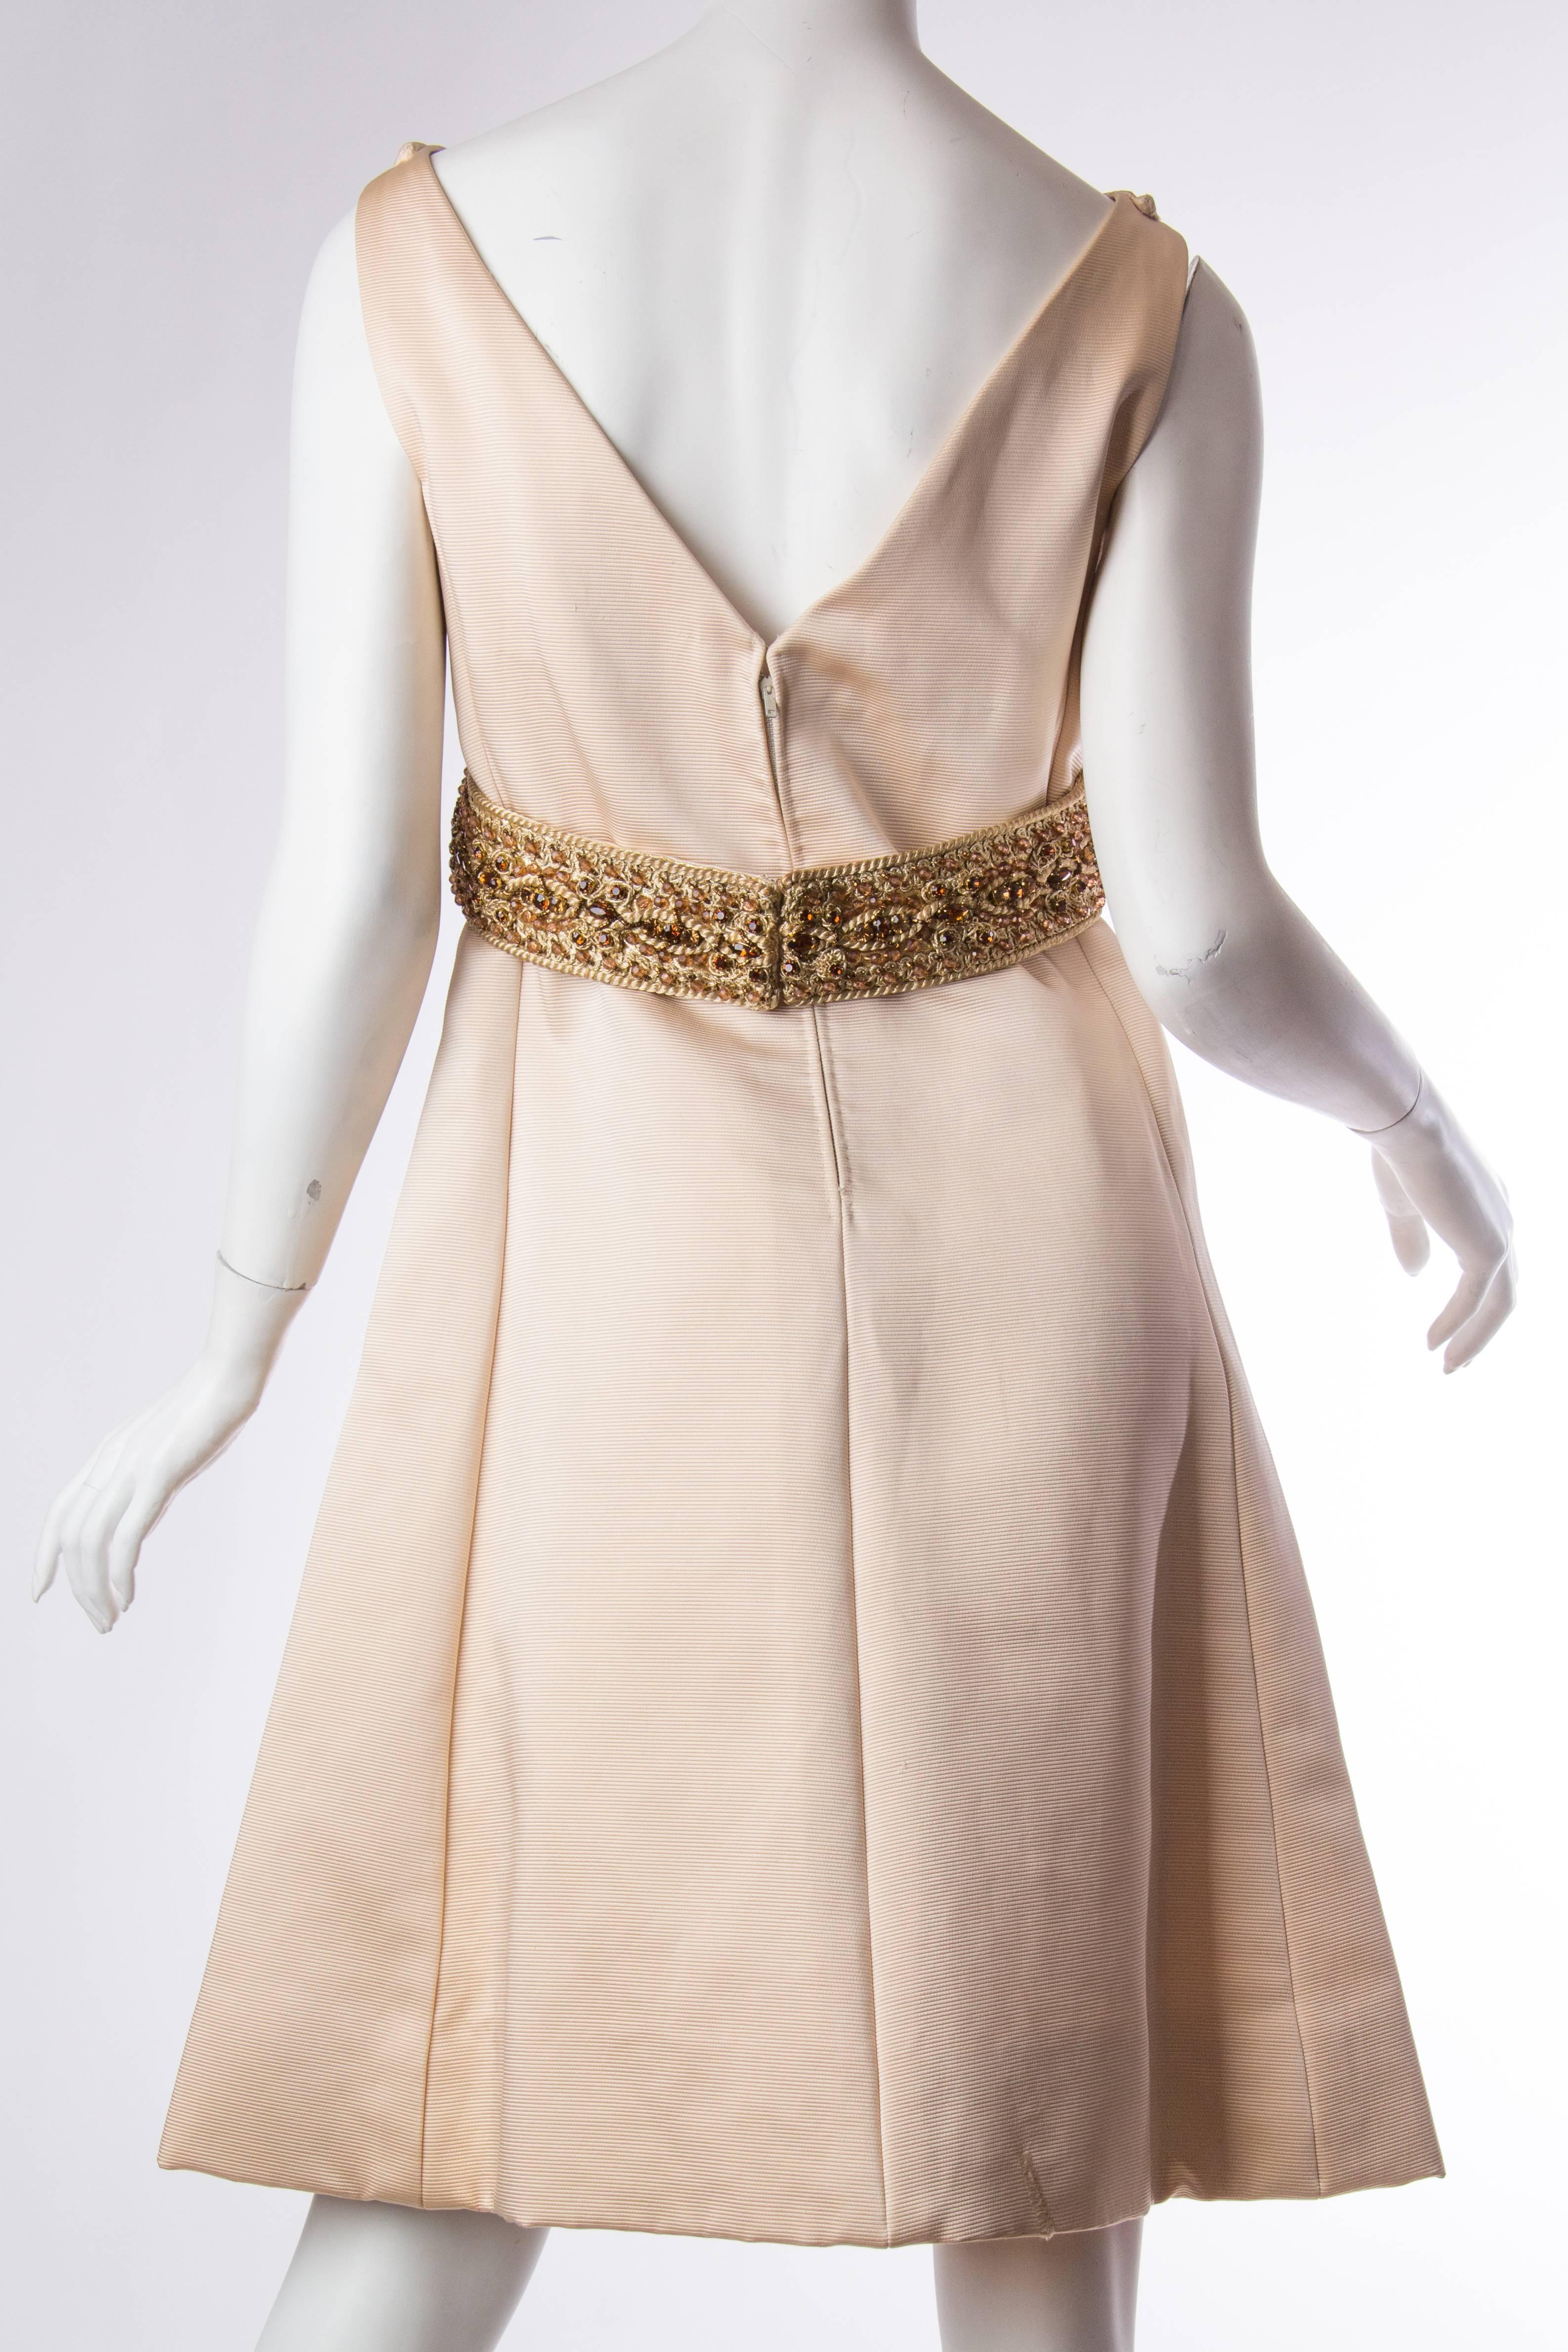 Women's Beautifully cut 1960s Dress with Gold and Crystal Detailing